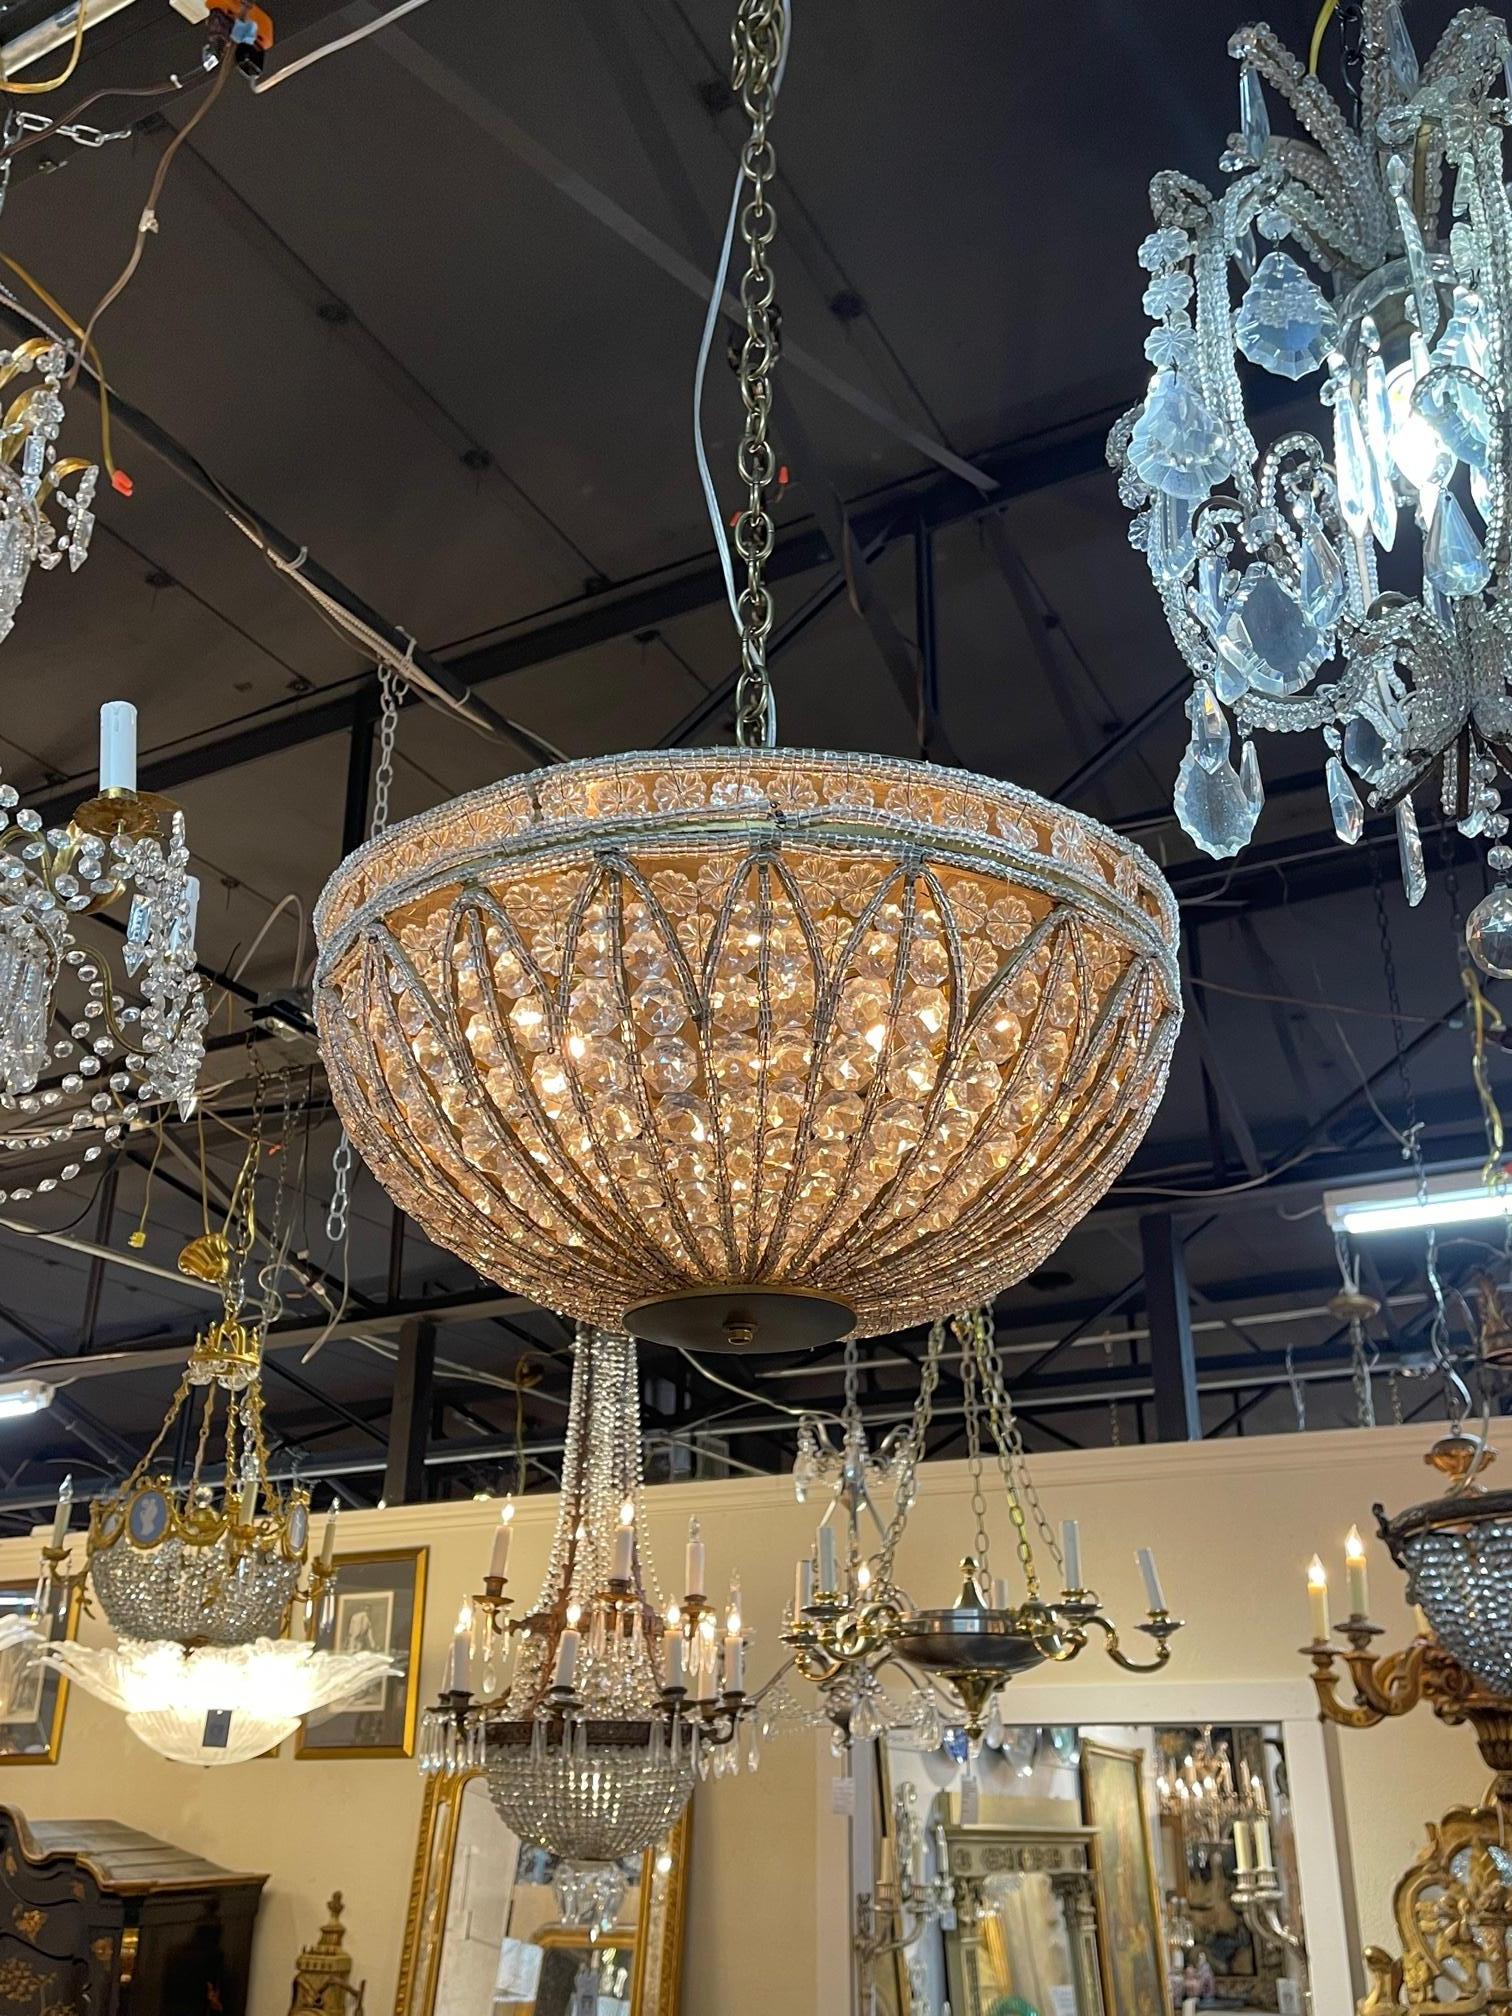 Stunning vintage French crystal bowl chandelier. Beautiful flower crystals and beads. Creates a lovely image. So pretty!!